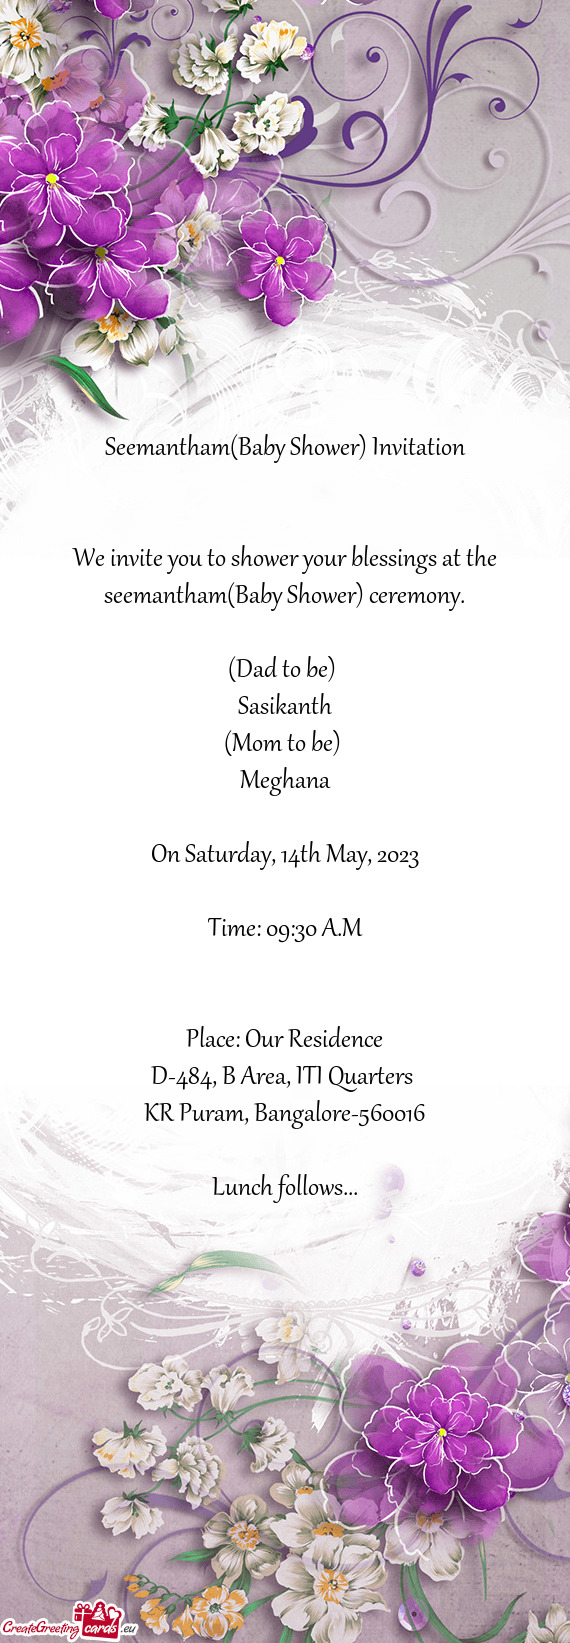 We invite you to shower your blessings at the seemantham(Baby Shower) ceremony